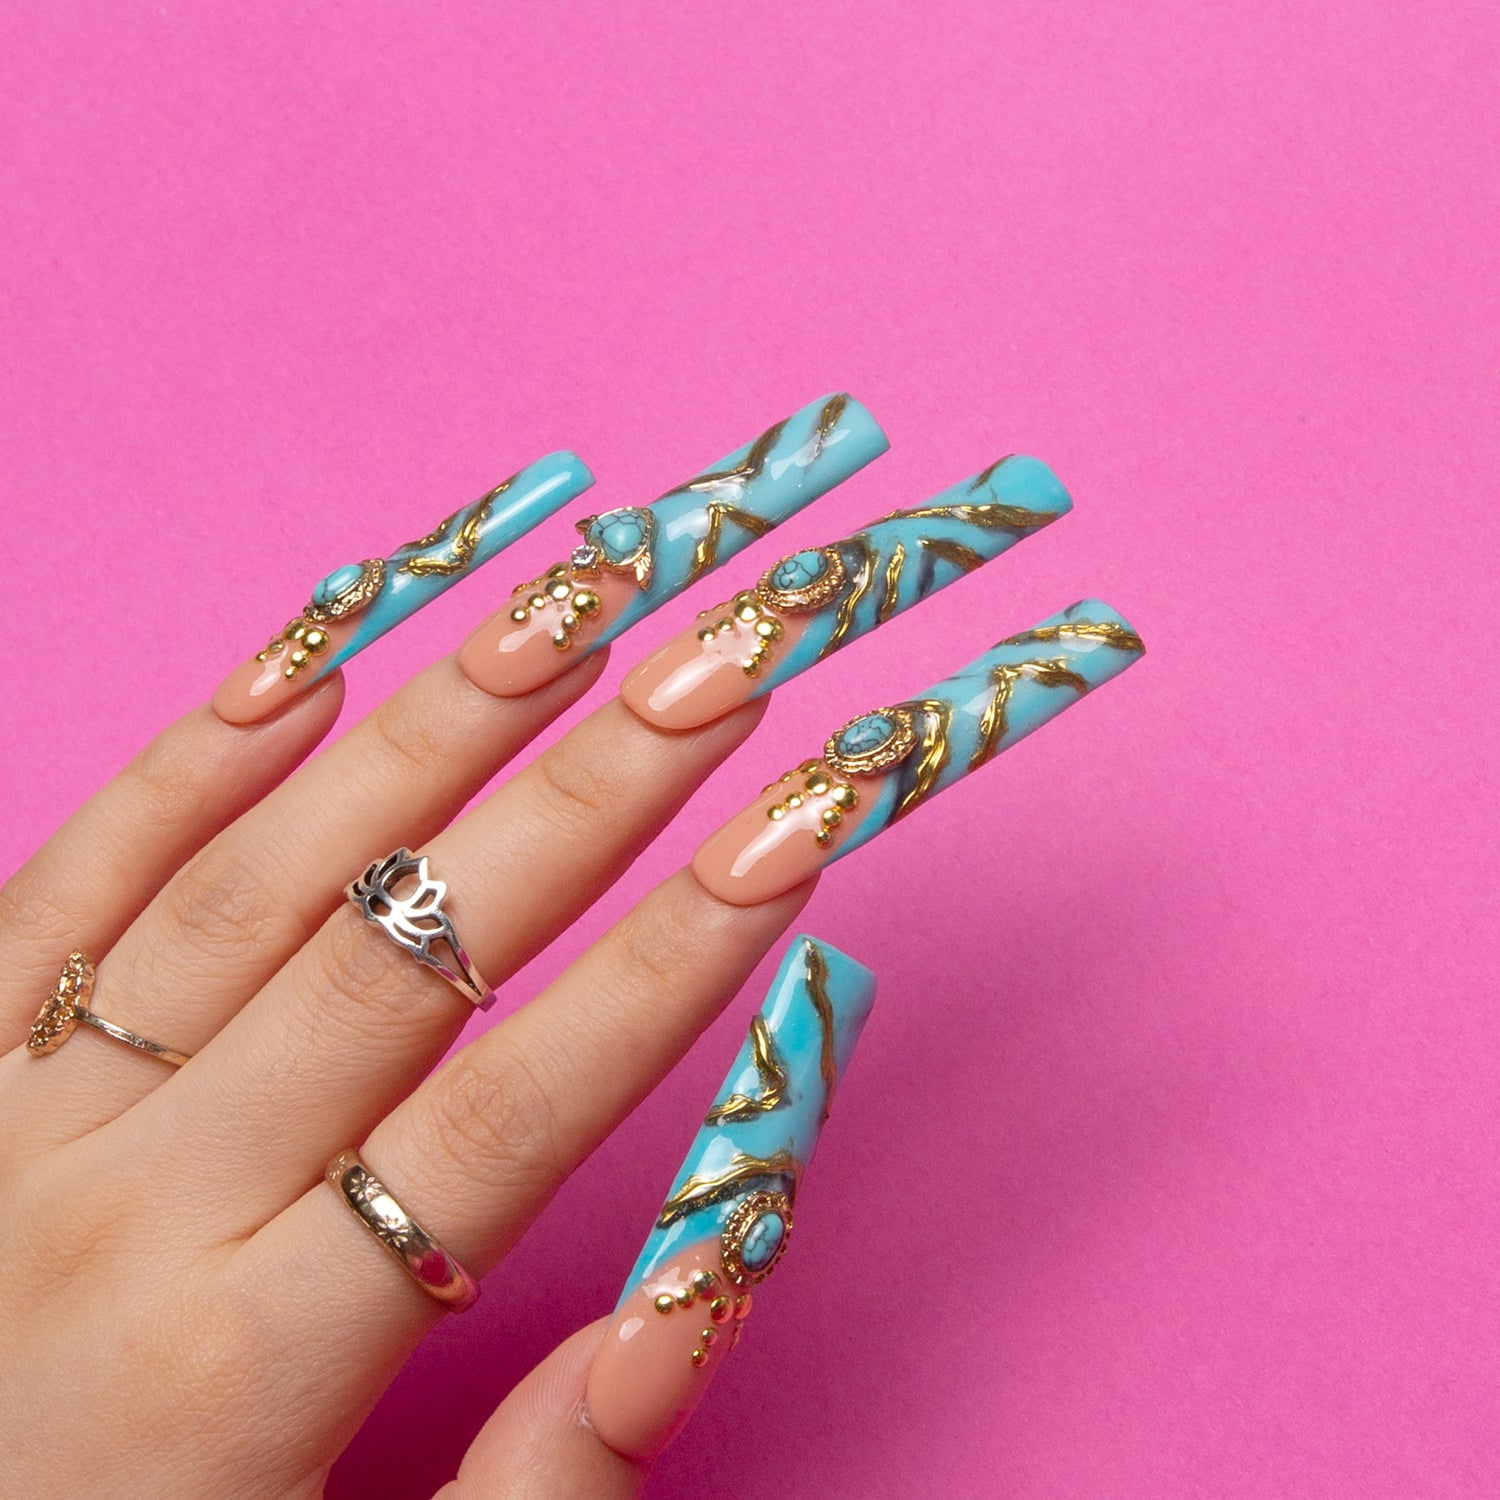 Hand with long, square-shaped turquoise press-on nails featuring golden decor and sparkling gems on a pink background. Rings on fingers enhance the elegant appearance.